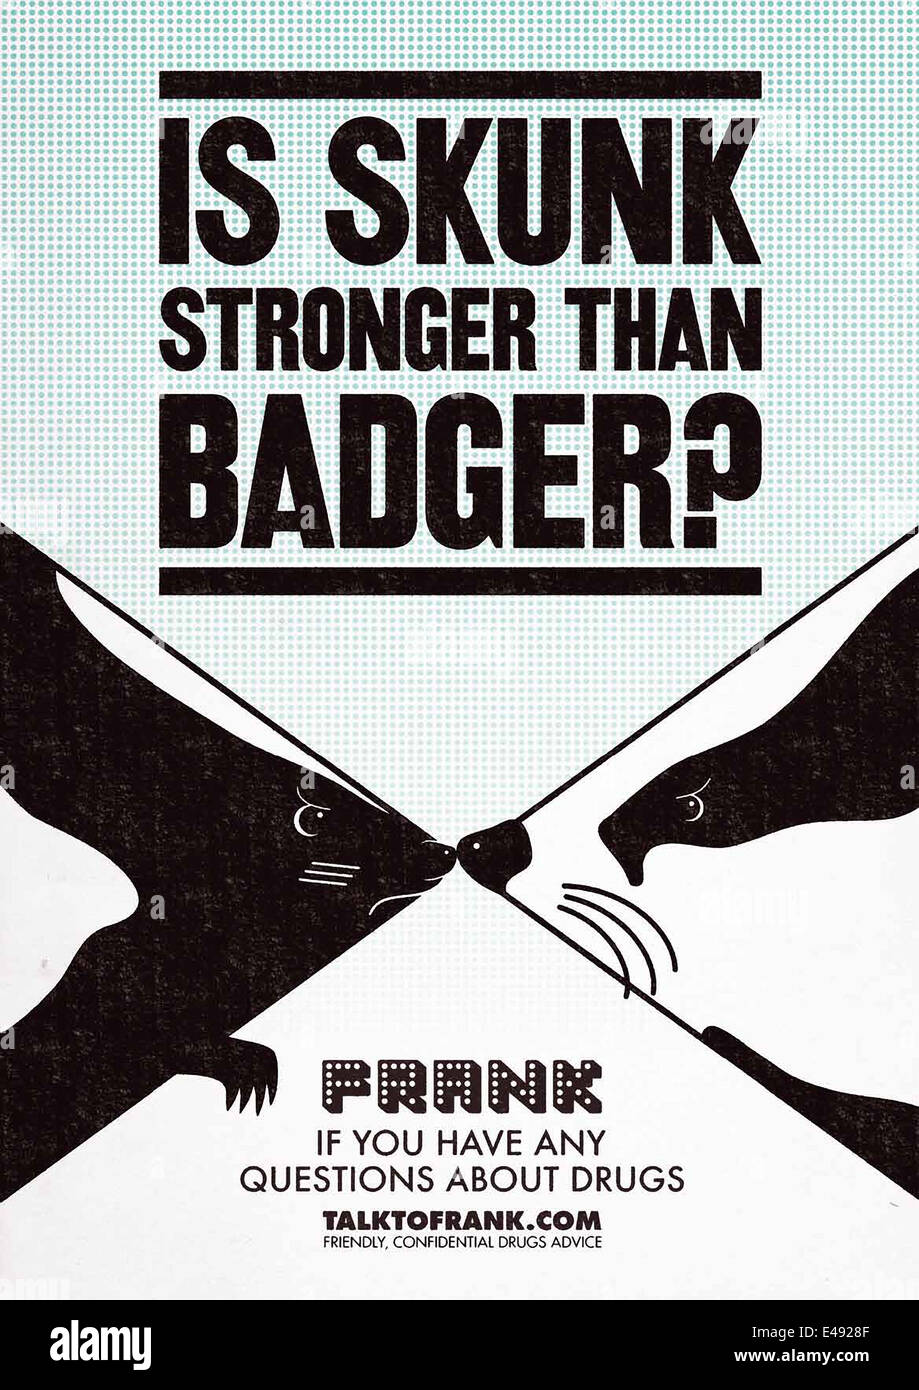 Poster from United Kingdom reduction of drug misuse and dependence FRANK, 'Is Skunk Stronger than Badger?'. Stock Photo